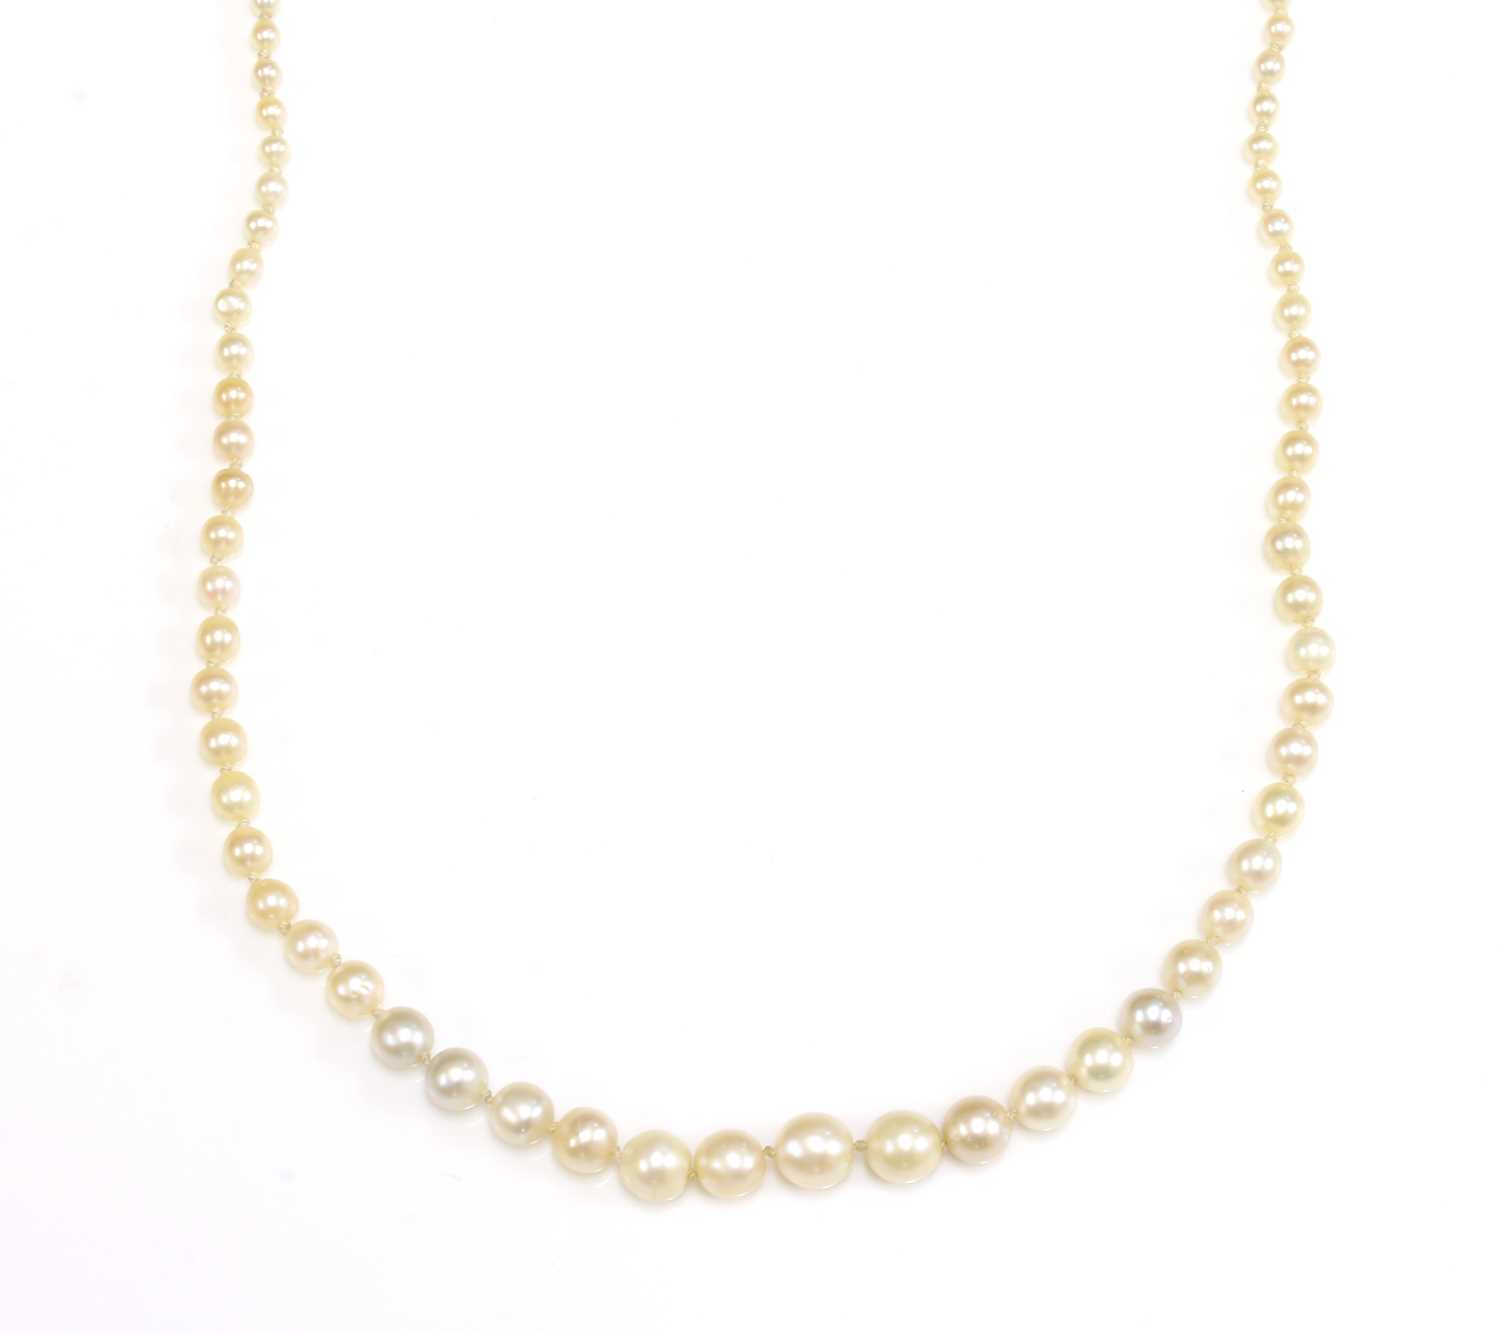 Lot 127 - A single row graduated natural saltwater pearl necklace